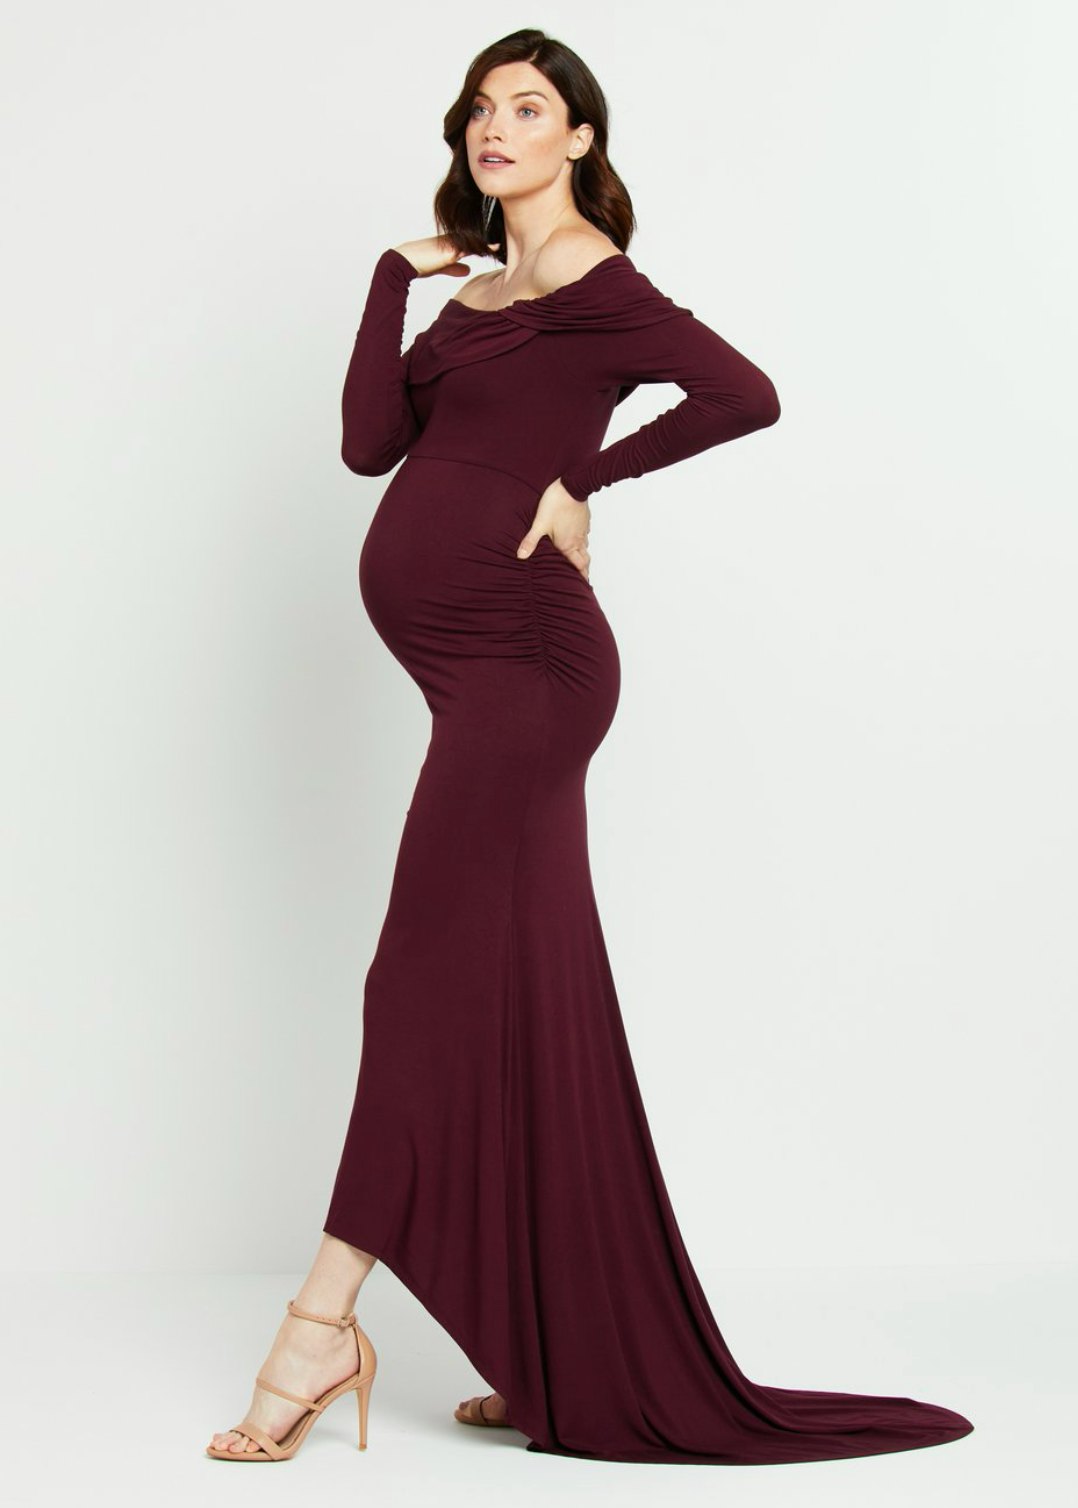 Buy Maternity Gowns  Maternity Dresses Online India  Buy at FirstCrycom